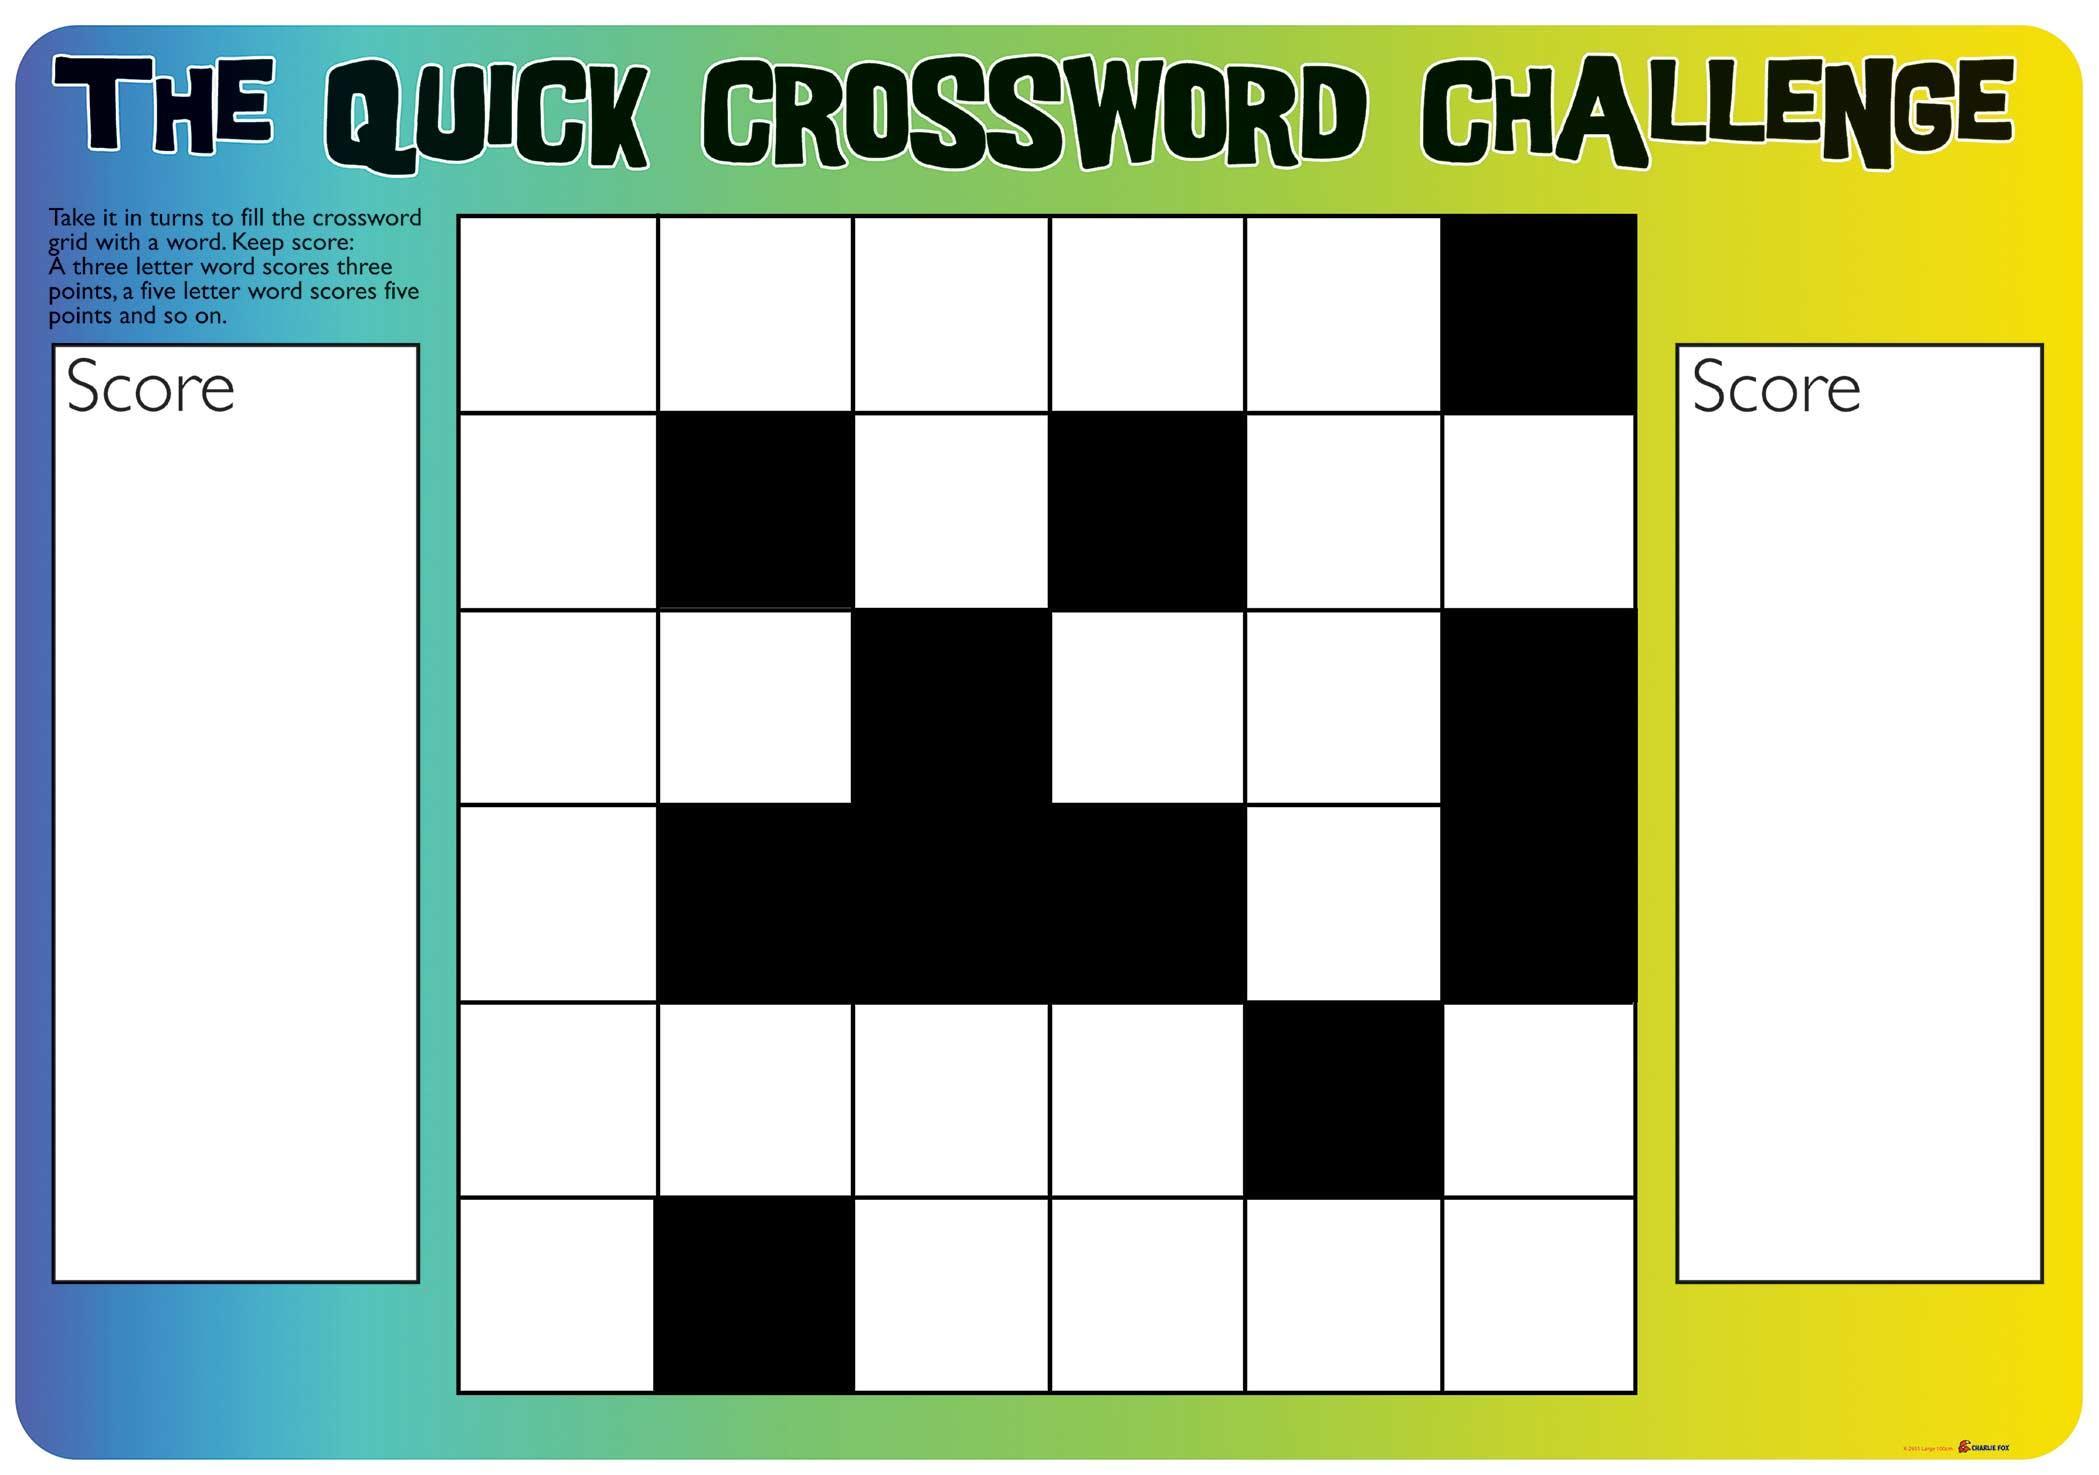 game-quest-crossword-clue-answer-crossword-key-history-computing-games-game-surfnetkids-crosswords-m